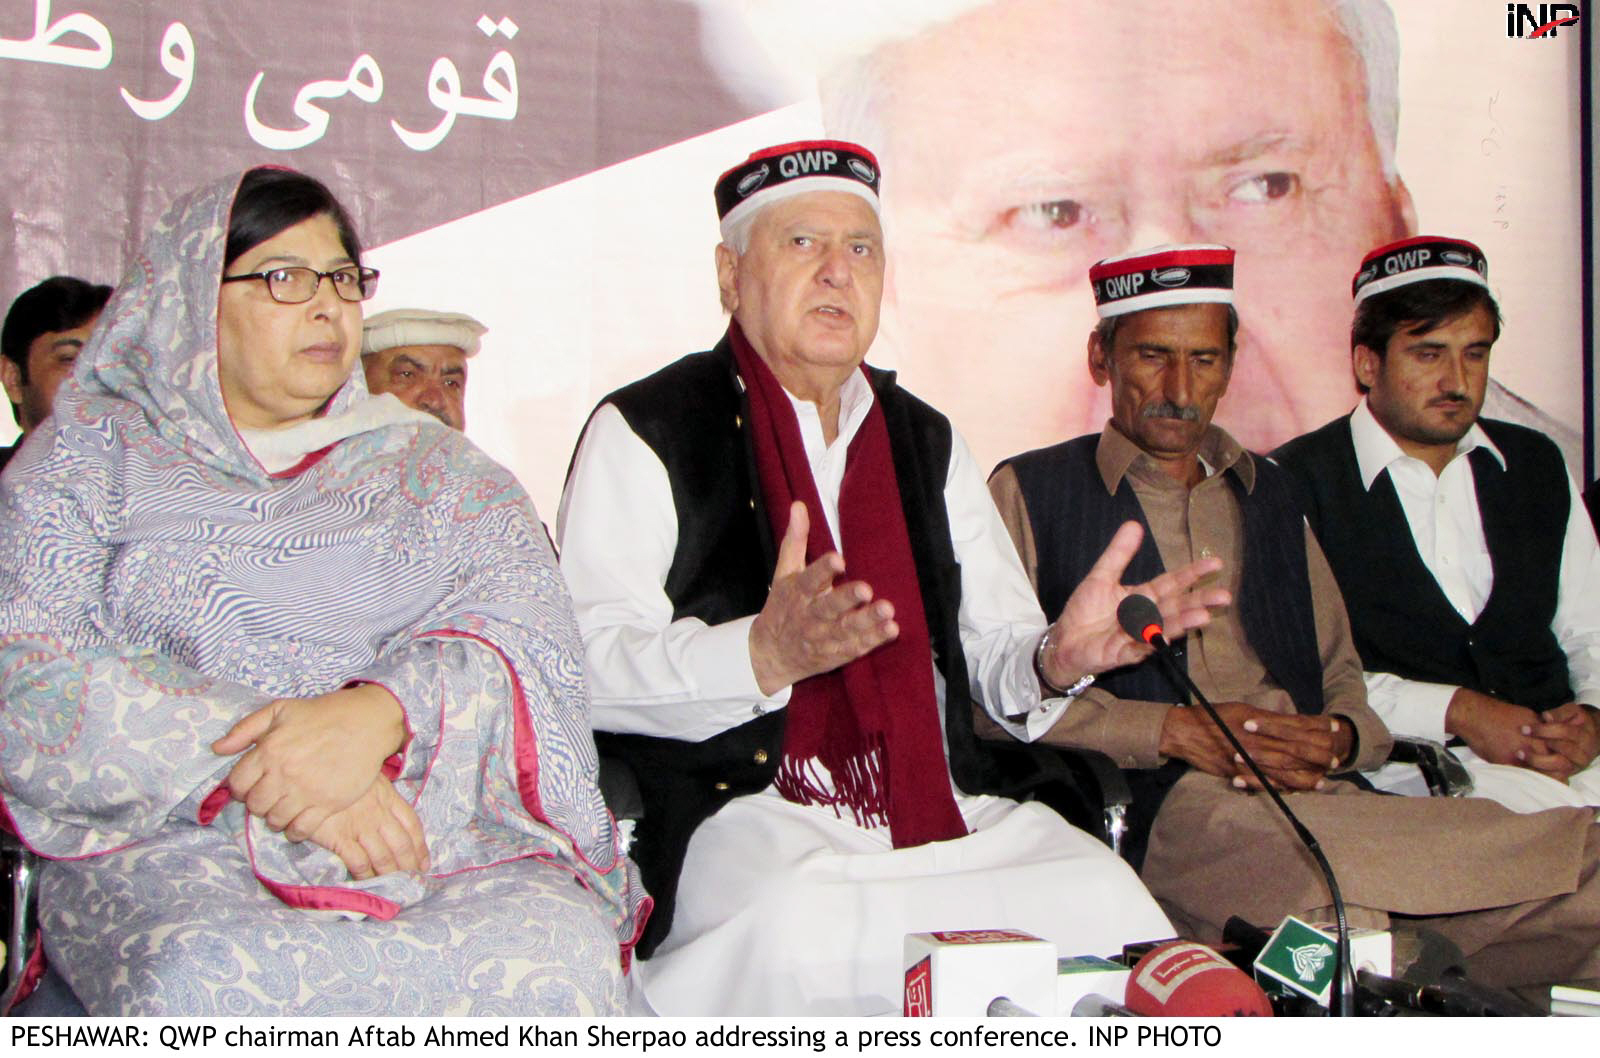 qwp chief aftab ahmed sherpao c addressing a press conference in peshawar photo inp